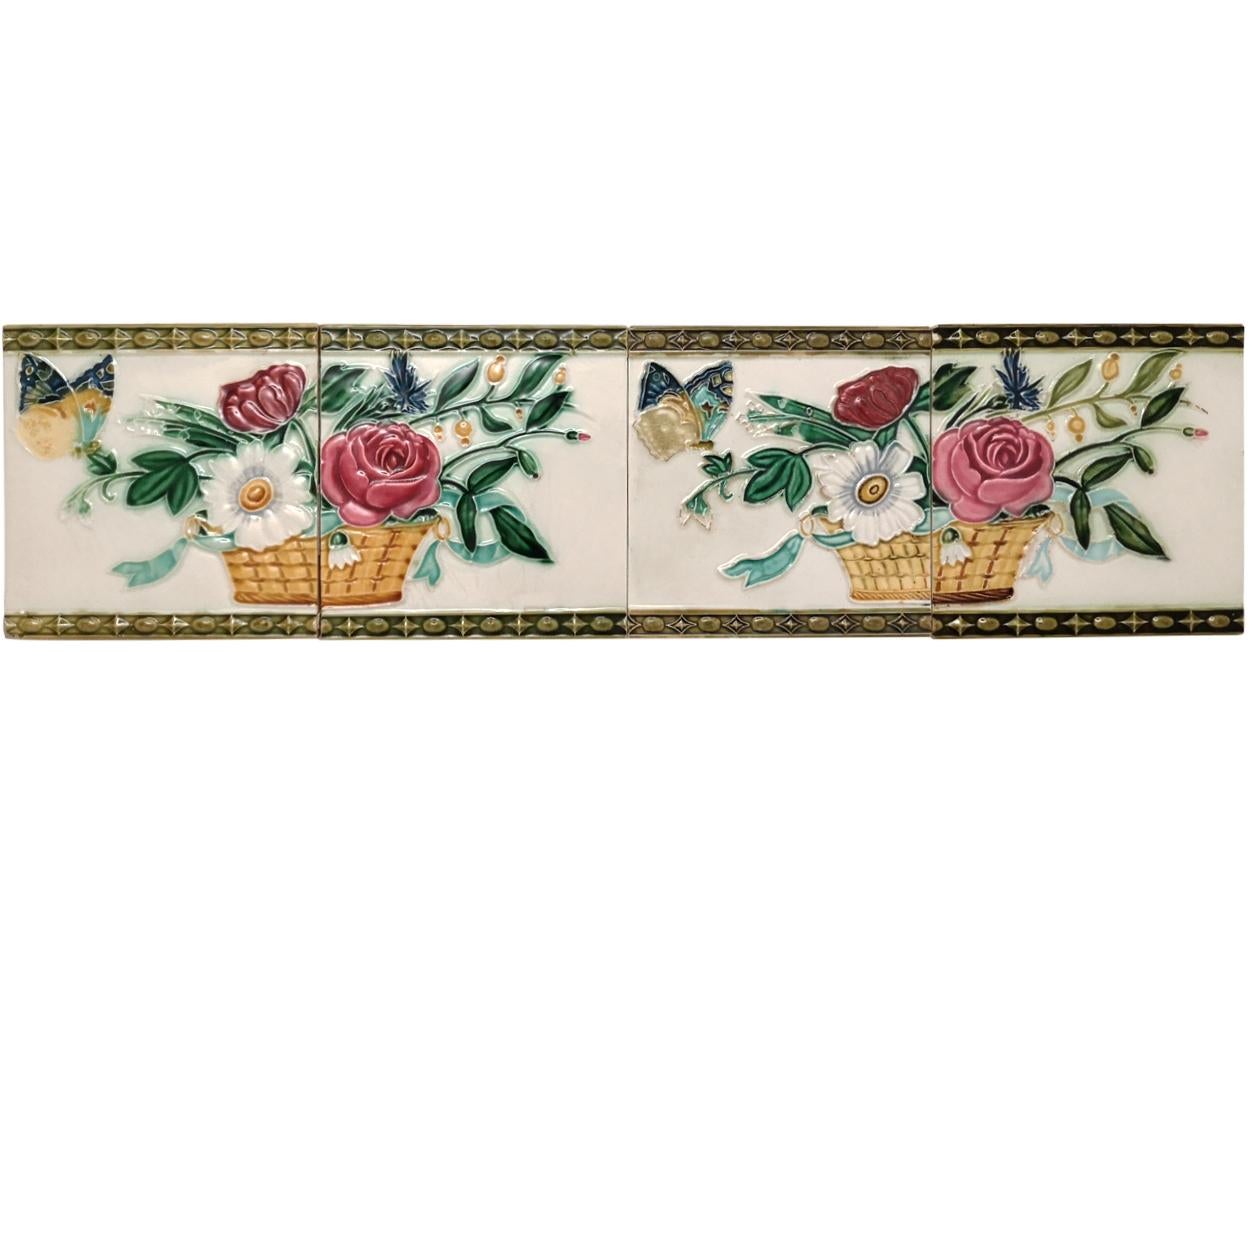 Beautiful wall tiles with an image of a butterfly and flower basket, trimmed with a beautiful edge. Manufactured around 1900, Morialme, Belgium.
Two tiles together form 1 image. There are 17 sets of two images + 1 extra, total 5.25 meters in length